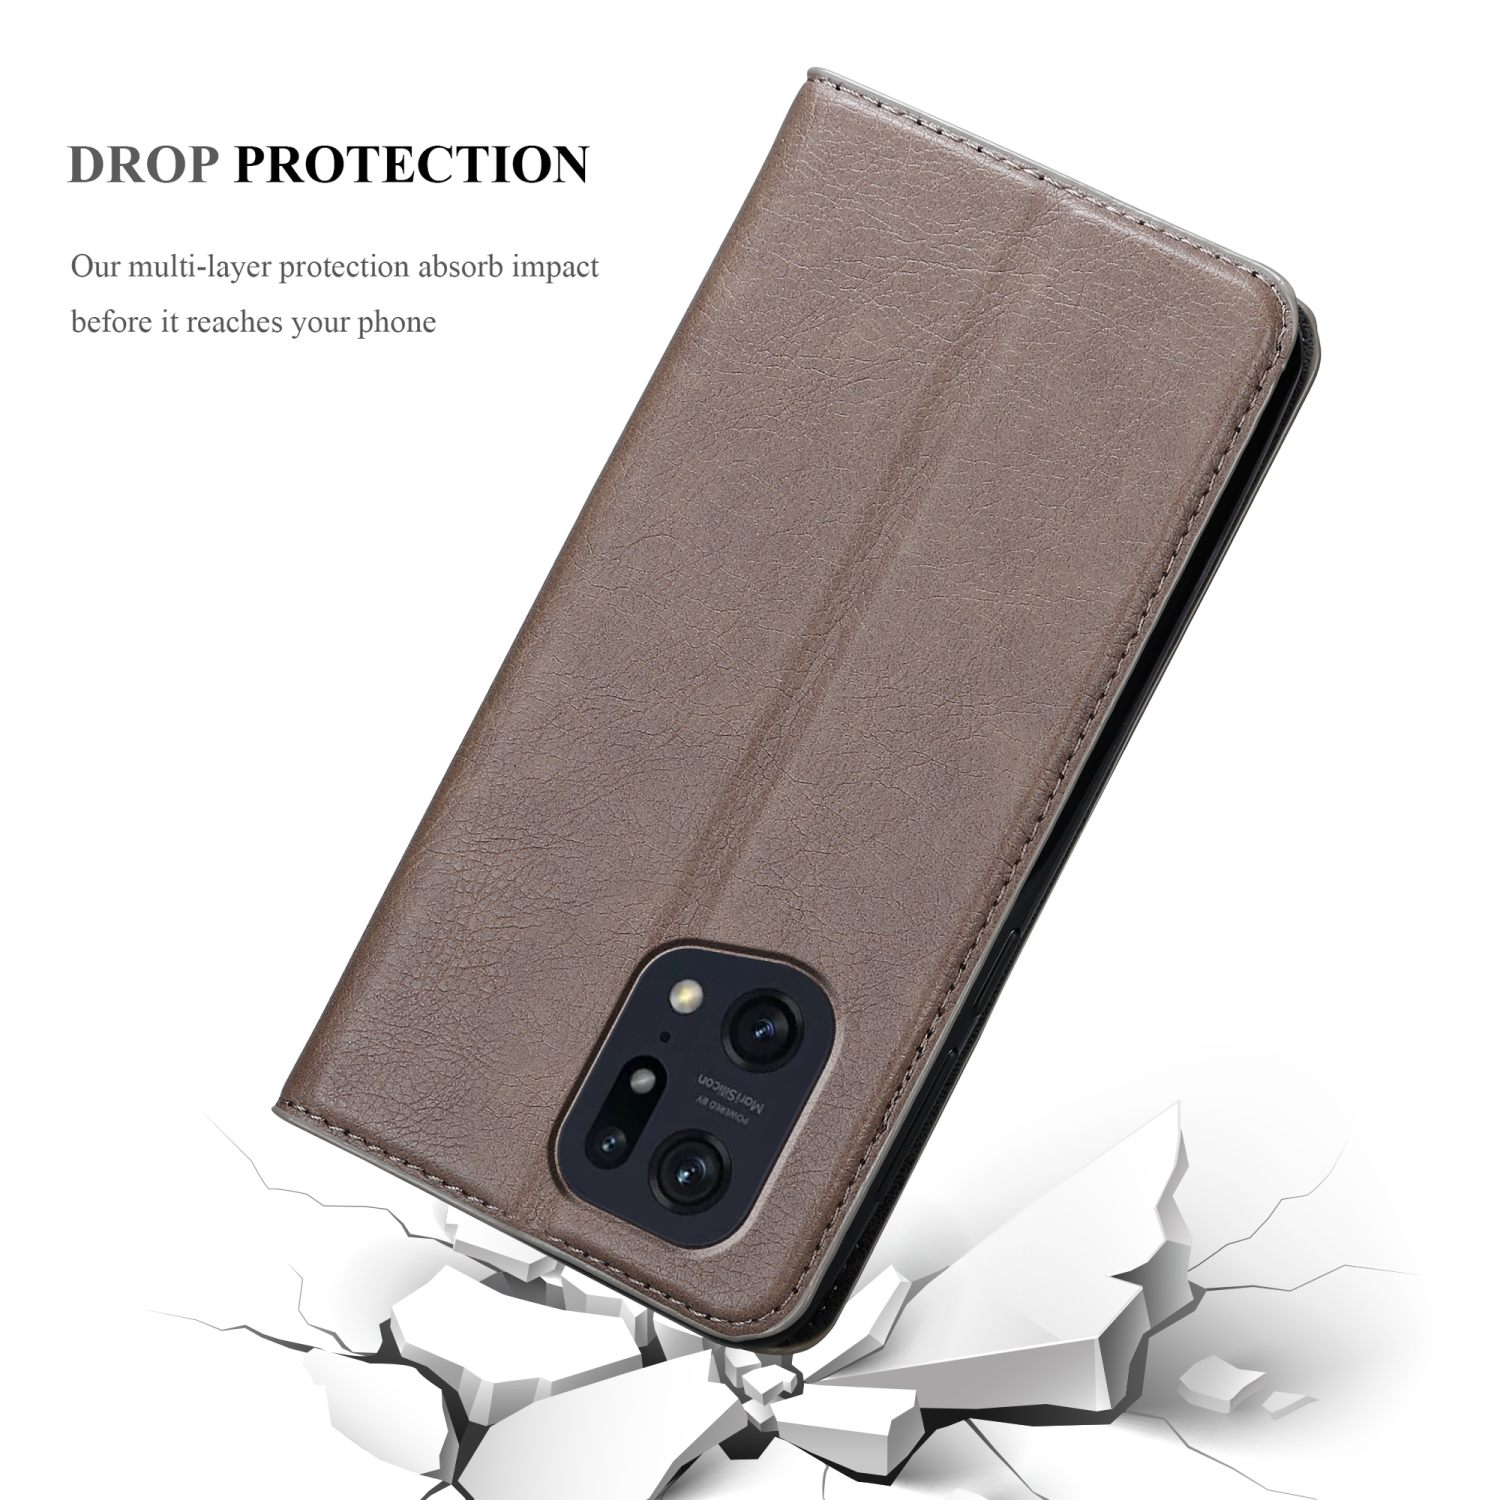 CADORABO Invisible PRO, Book Oppo, Hülle X5 BRAUN Magnet, FIND KAFFEE Bookcover,